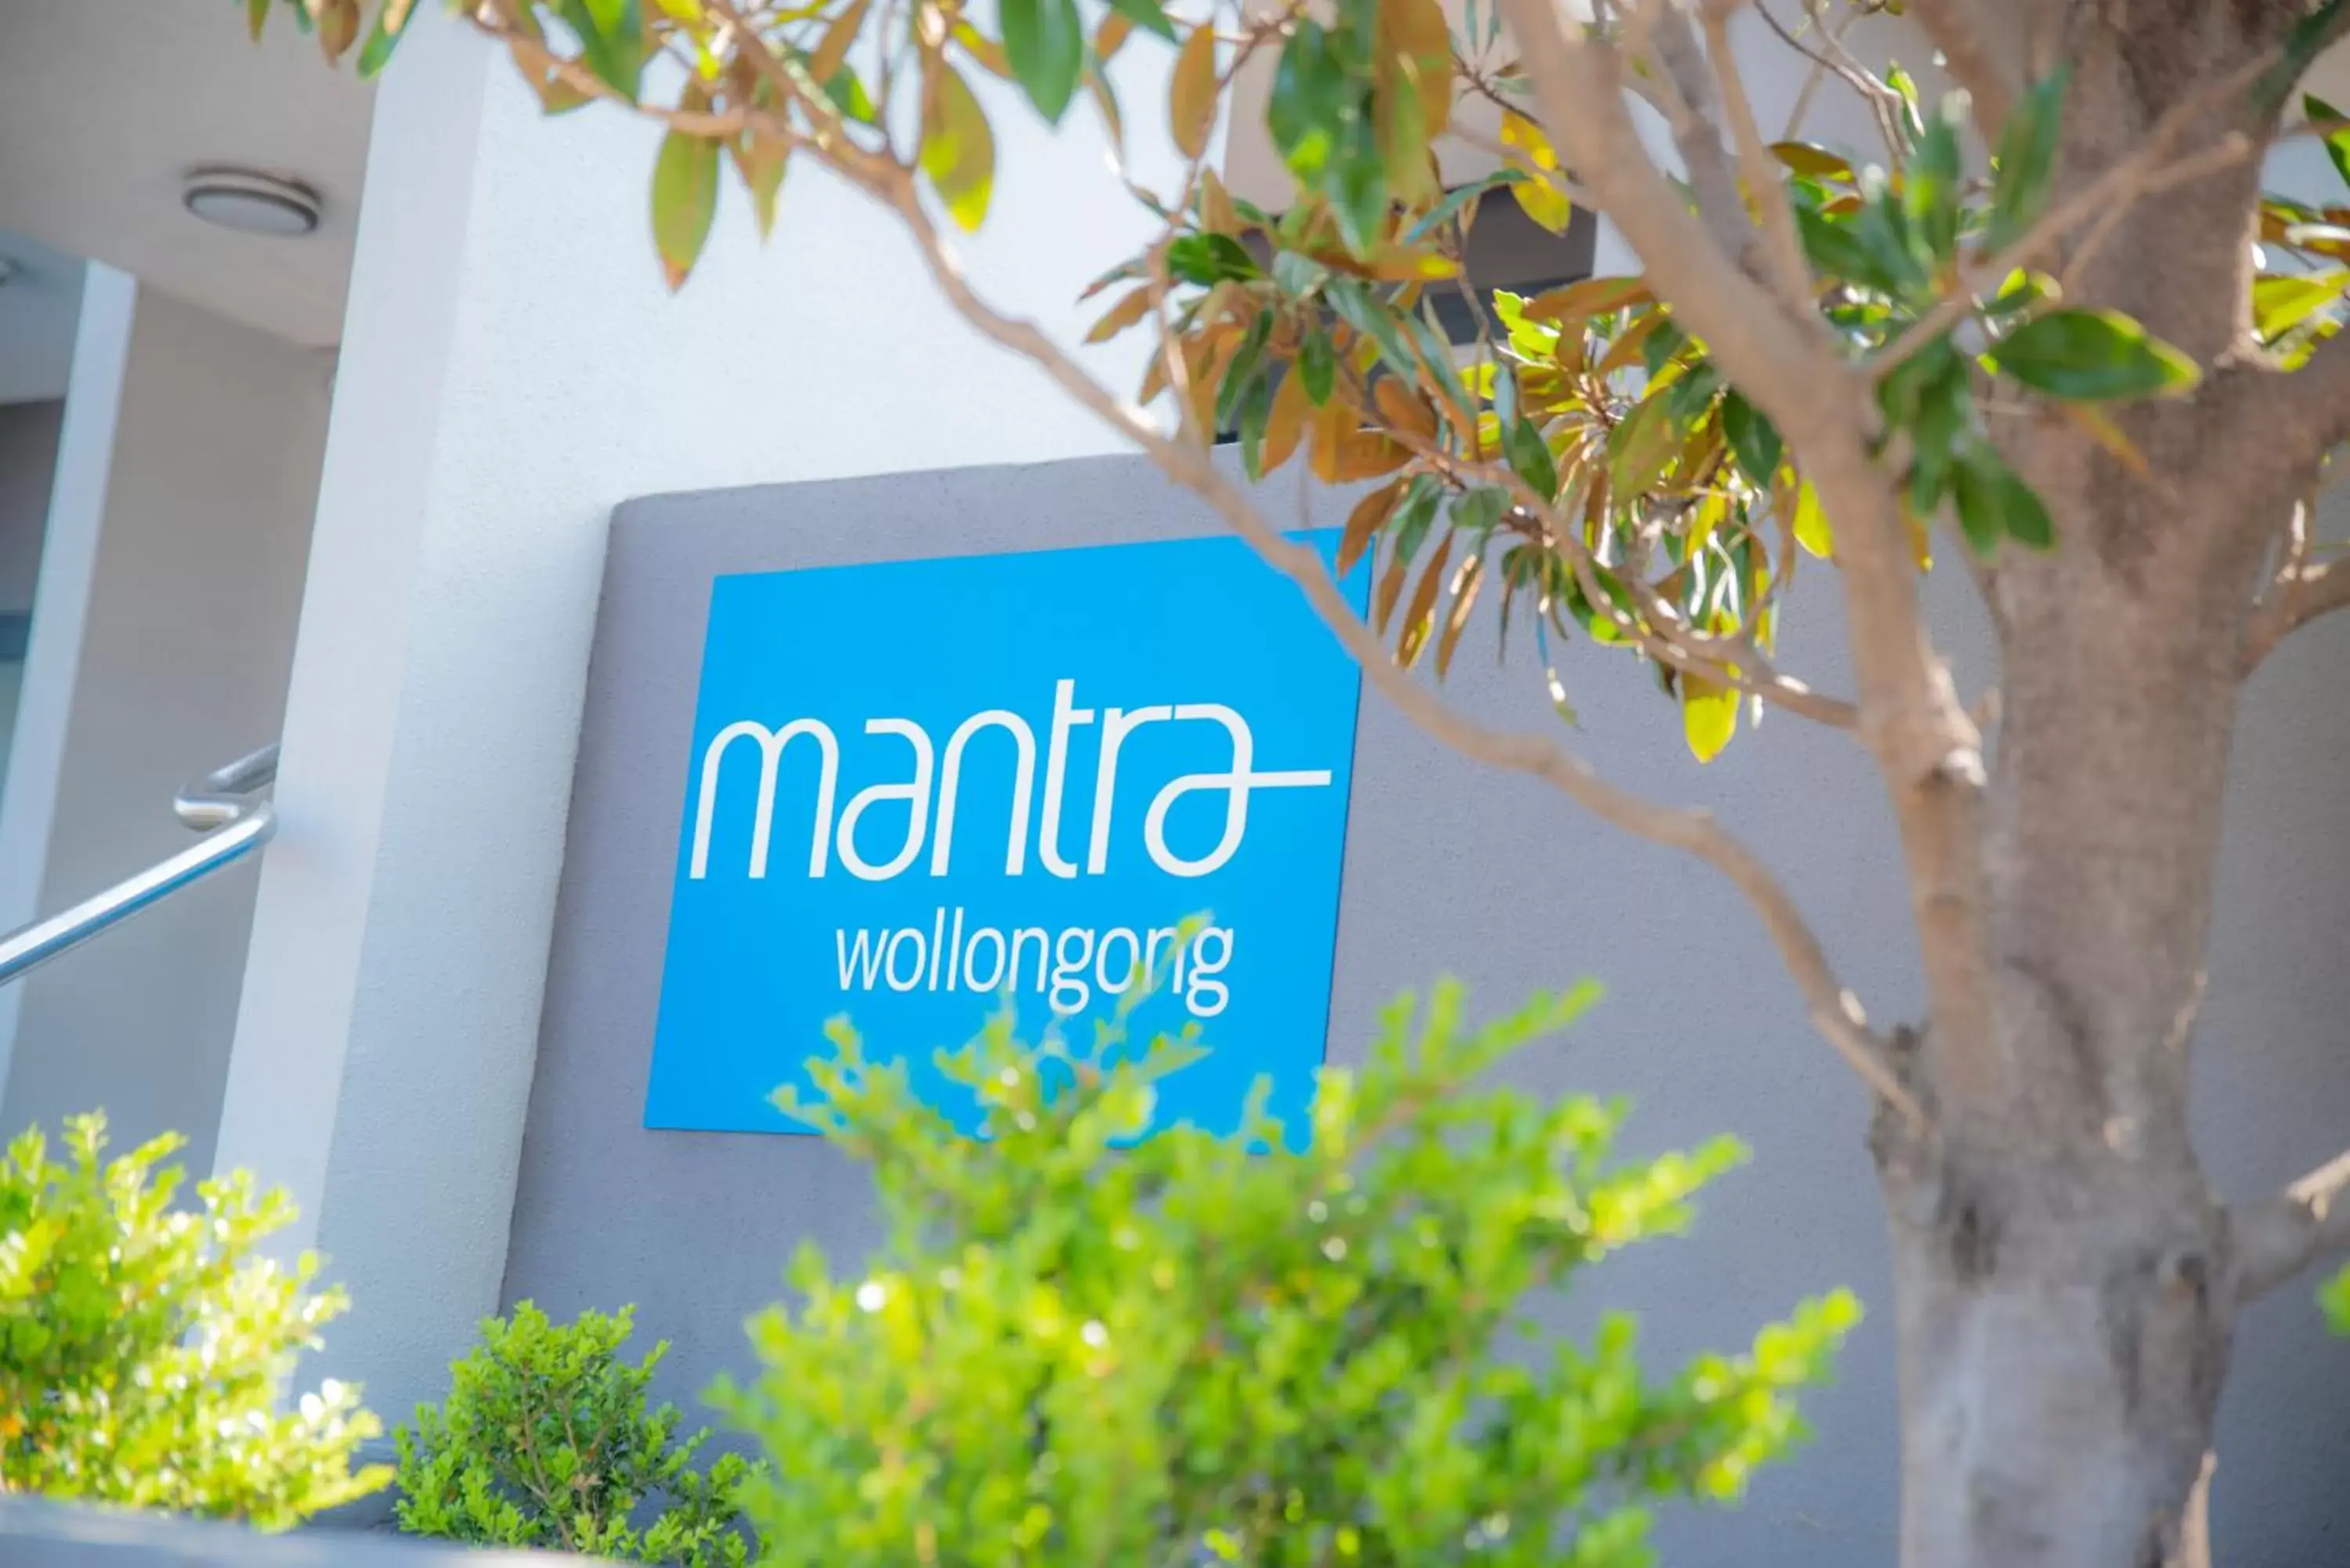 Property logo or sign in Mantra Wollongong